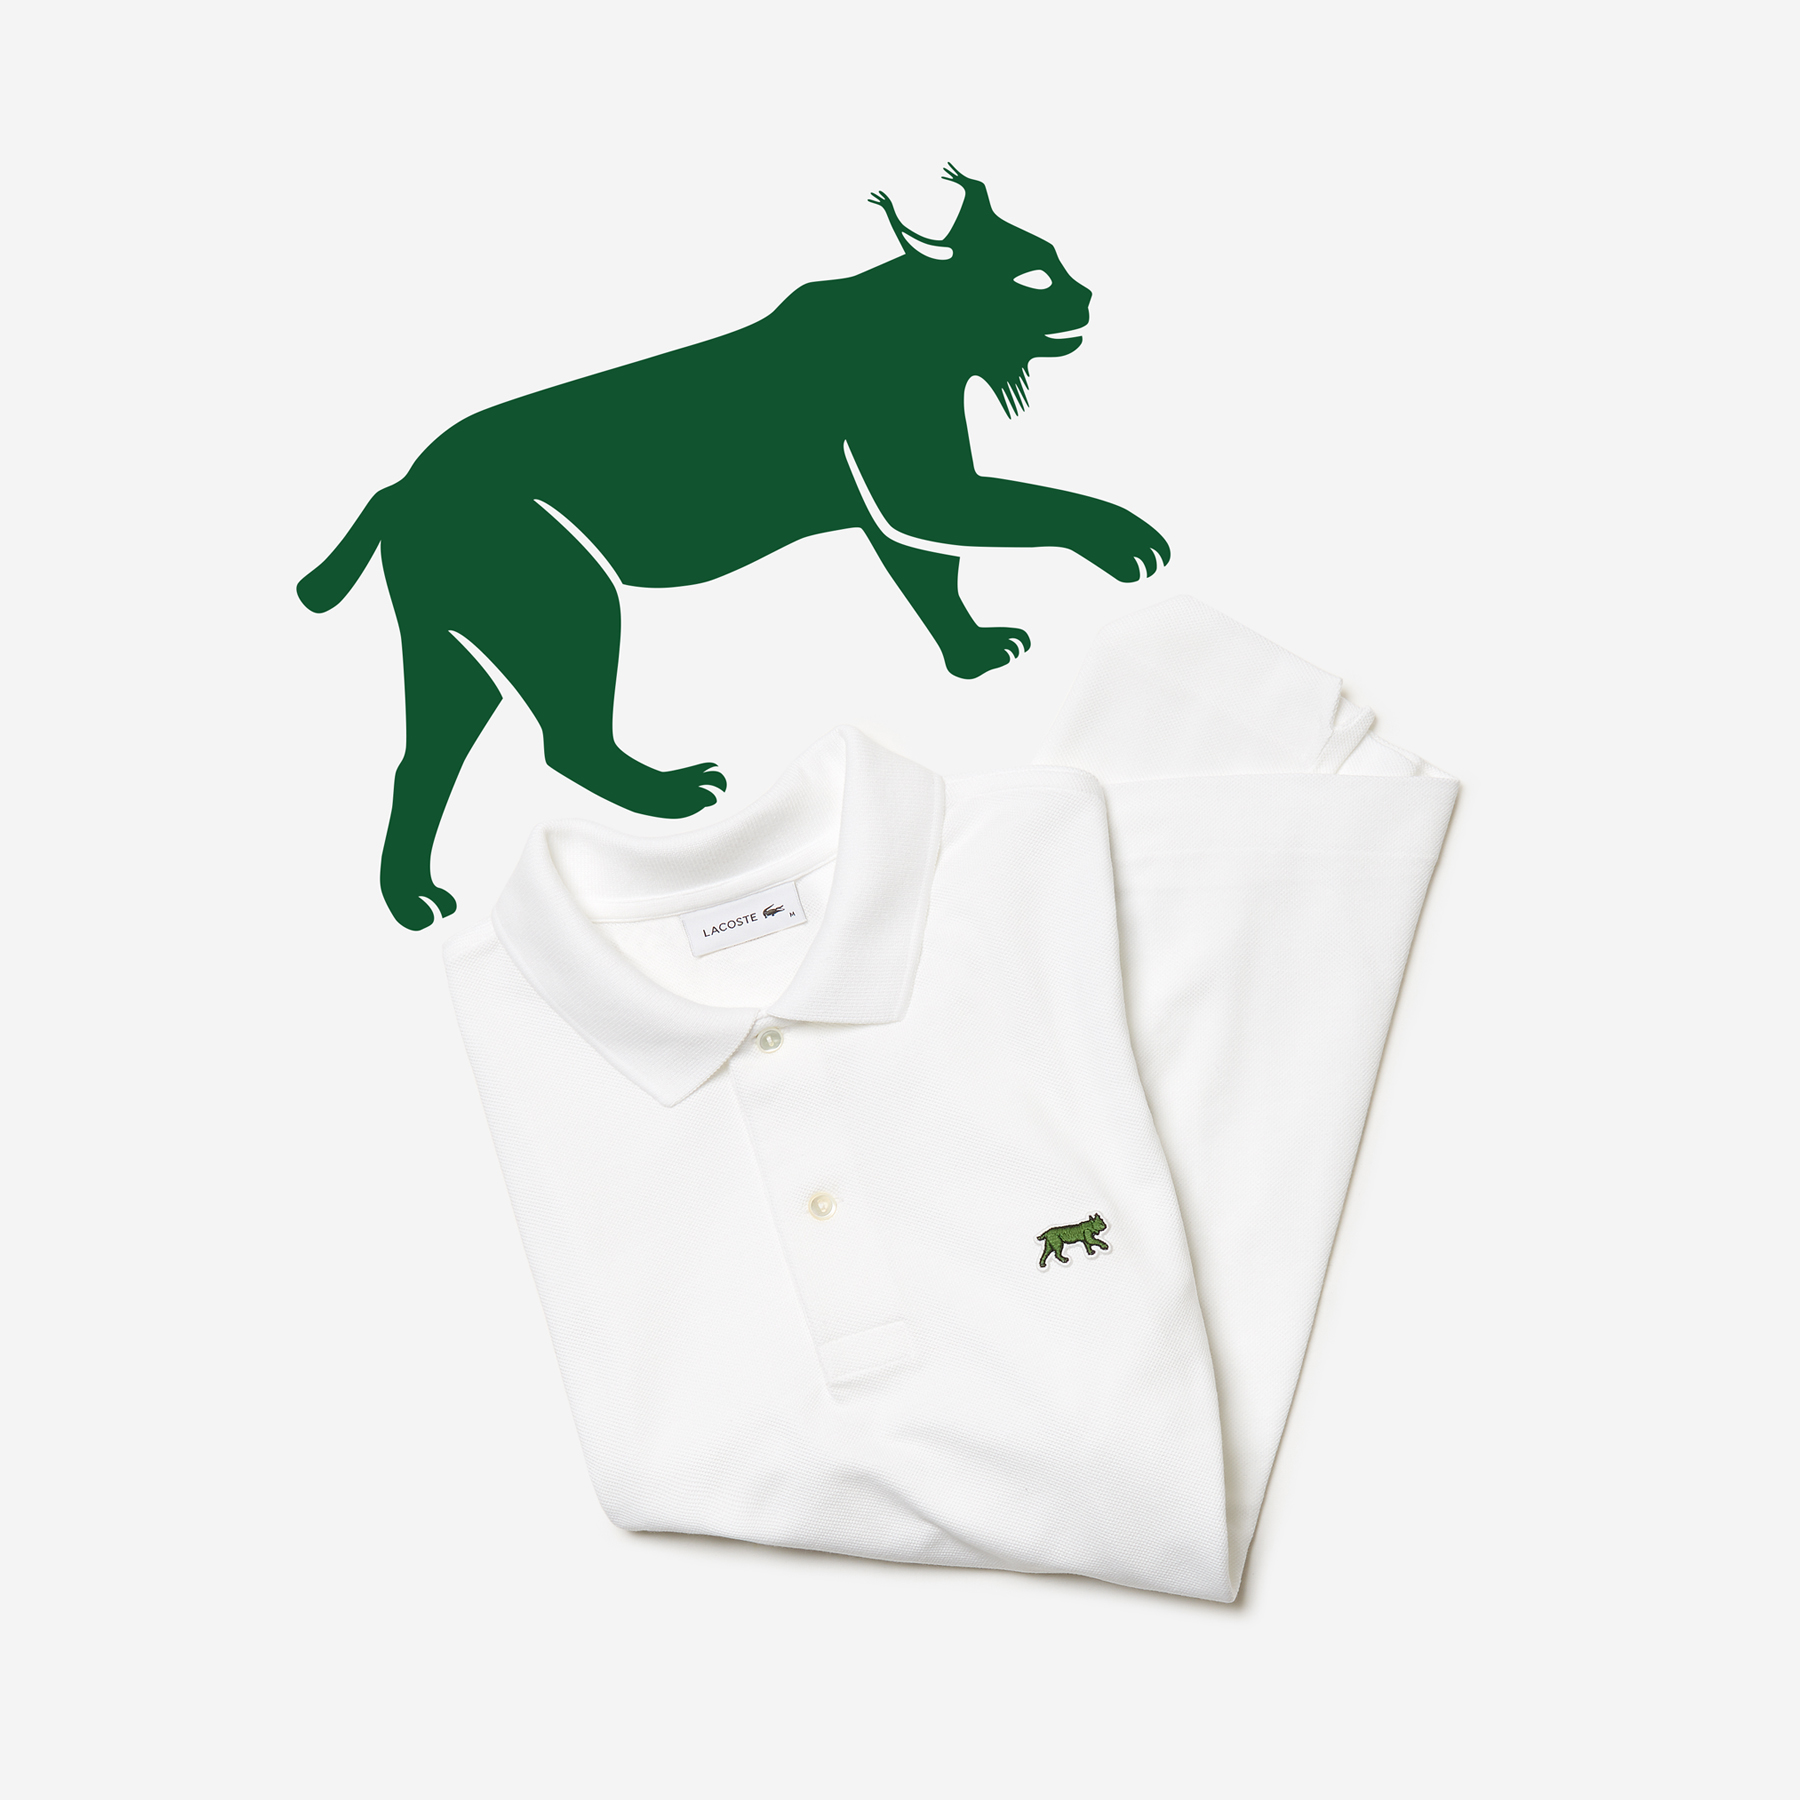 Lacoste x Save Our Species (IUCN) — SSI Life